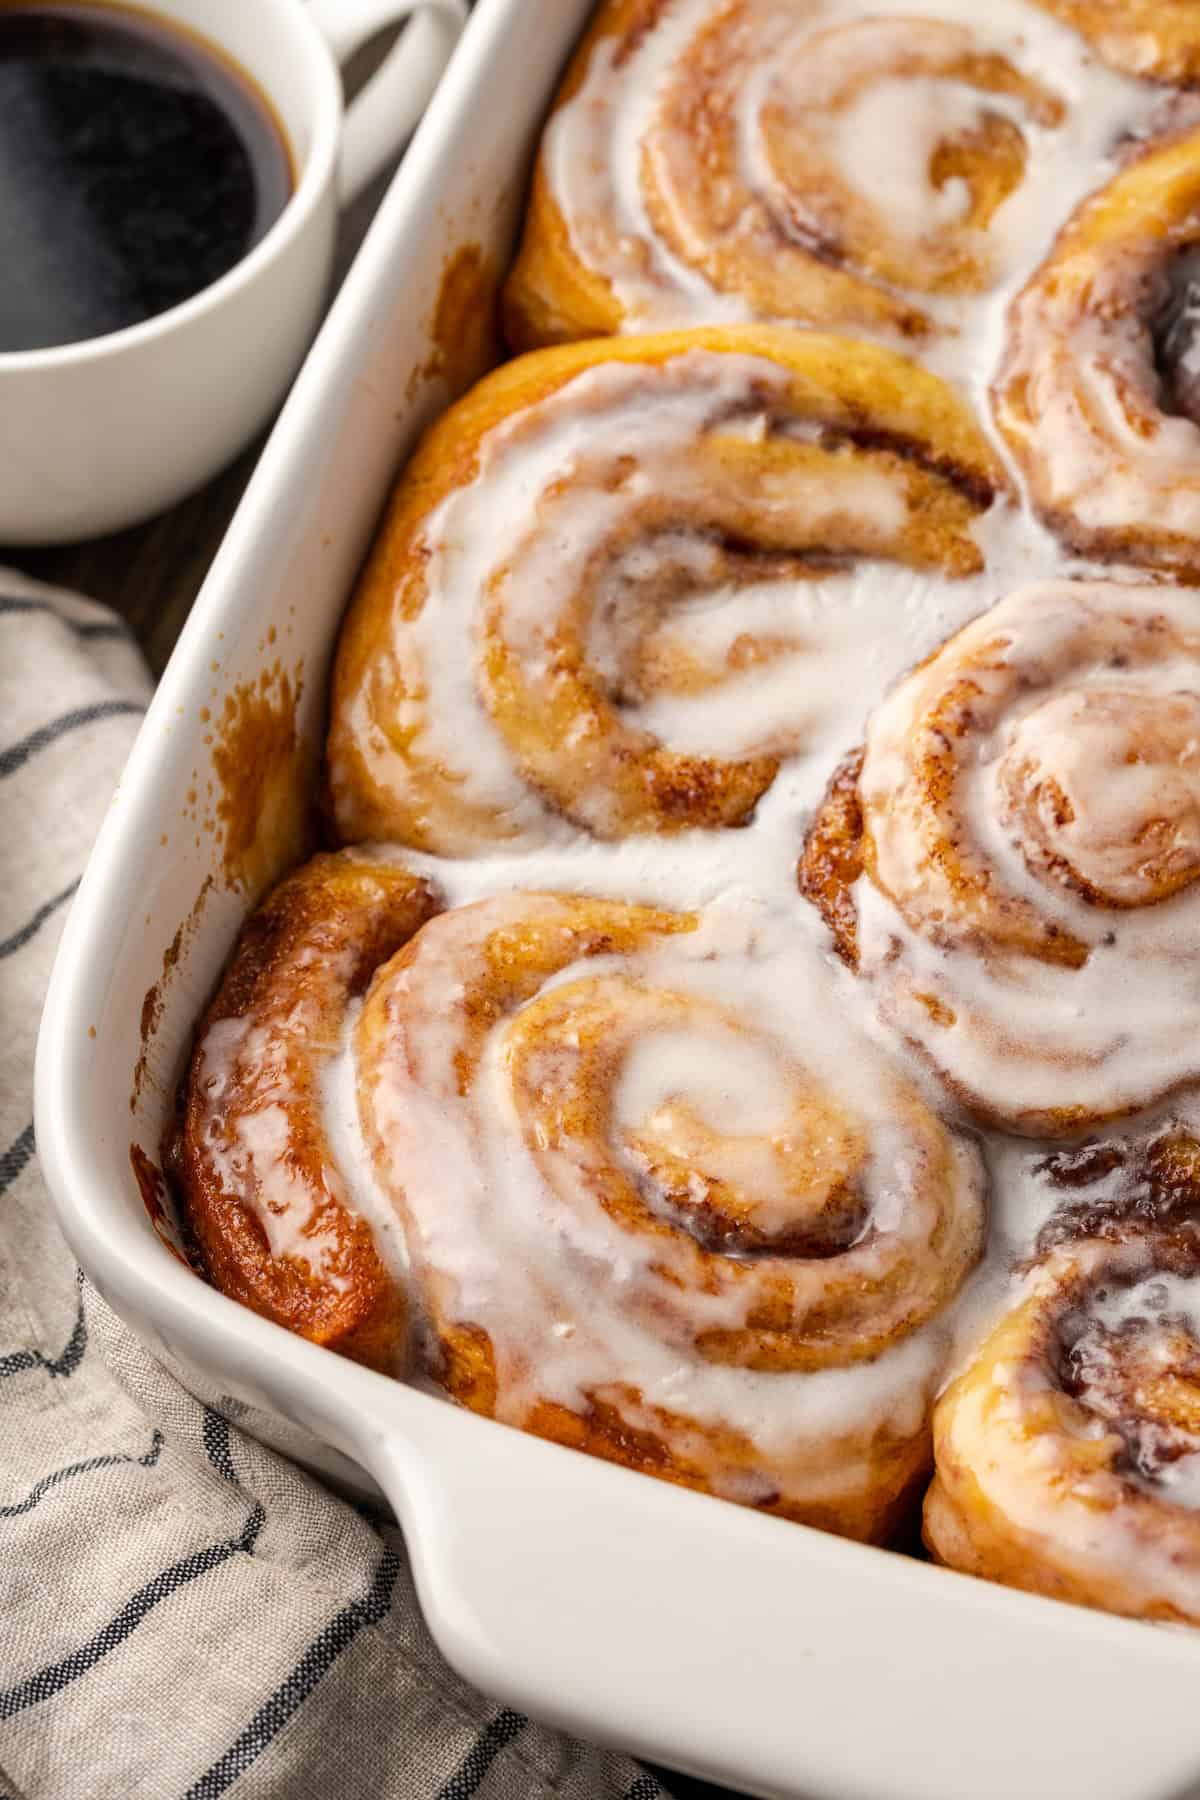 Overhead view of baked TikTok cinnamon rolls covered with icing in a ceramic baking dish, next to a cup of coffee.